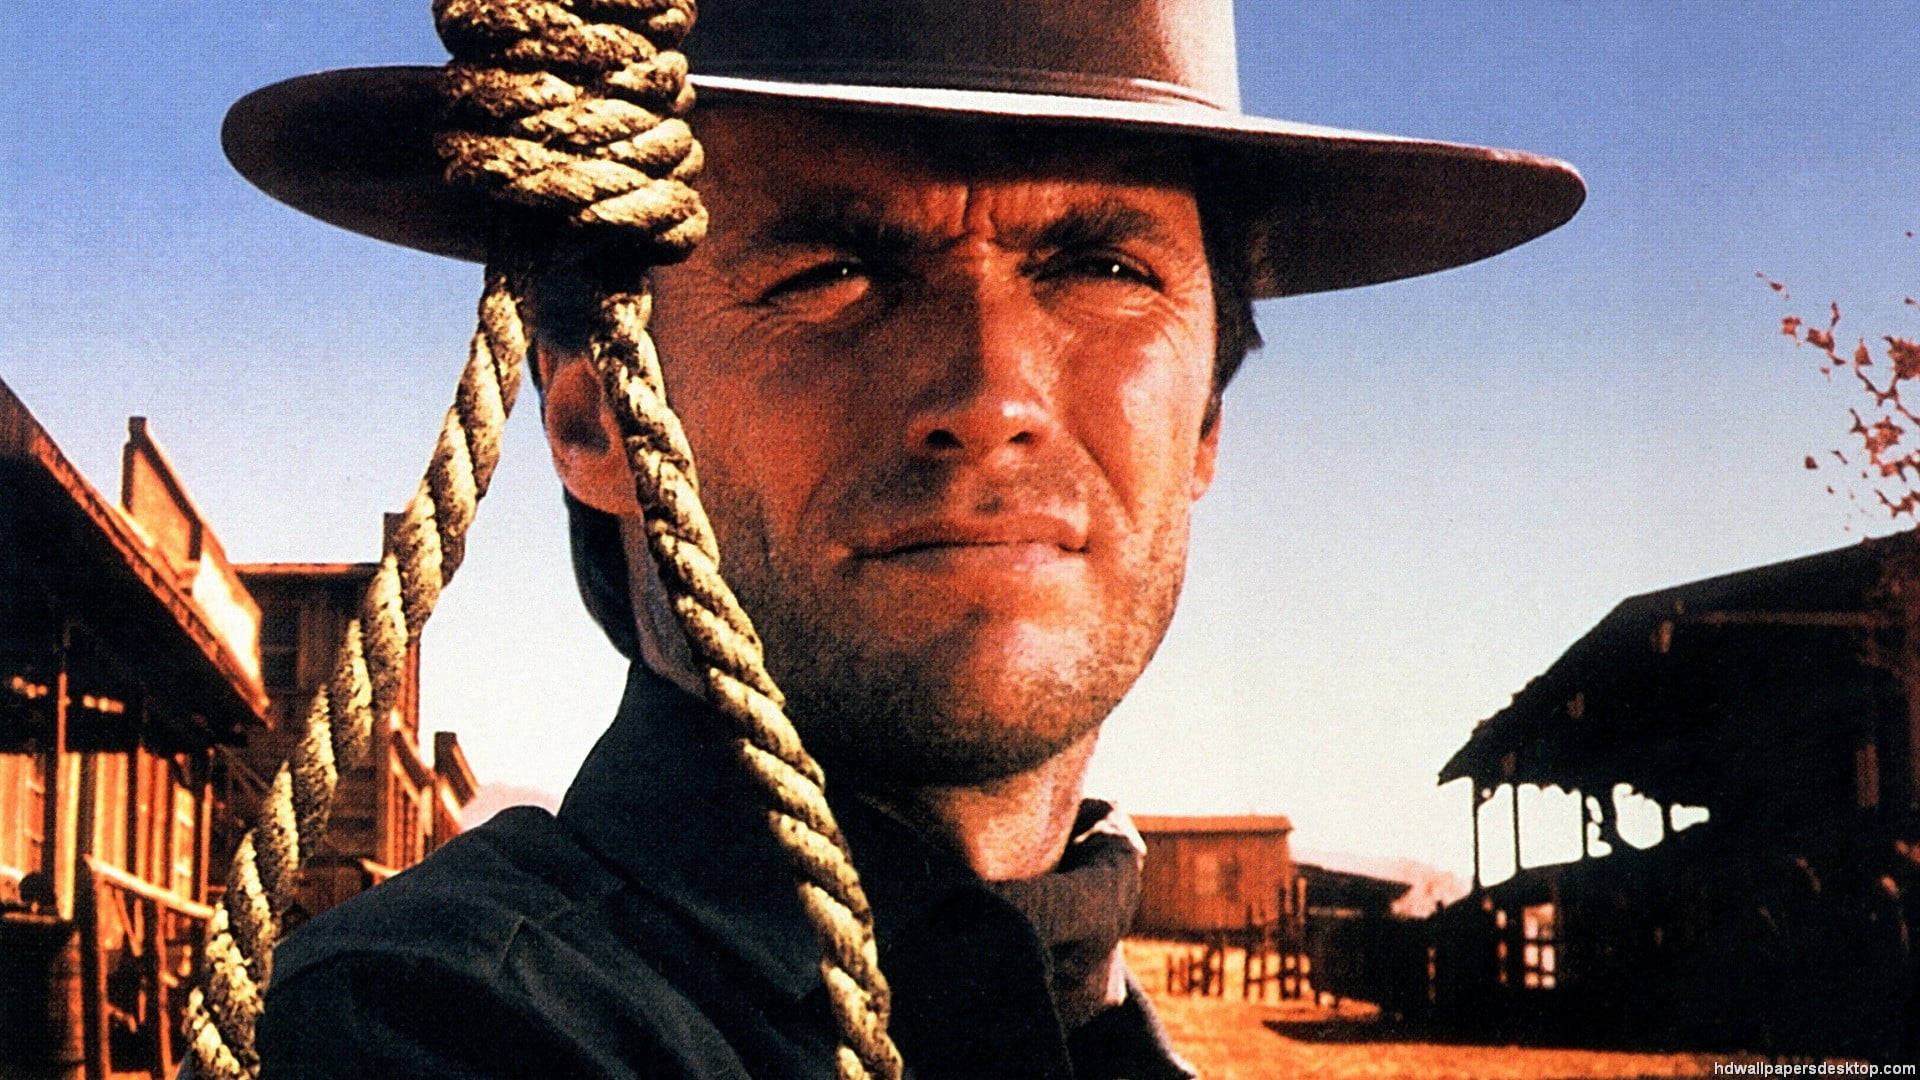 Wallpaper: Vær Clint Eastwood The Good, The Bad And The Ugly Noose Poster Wallpaper. Wallpaper